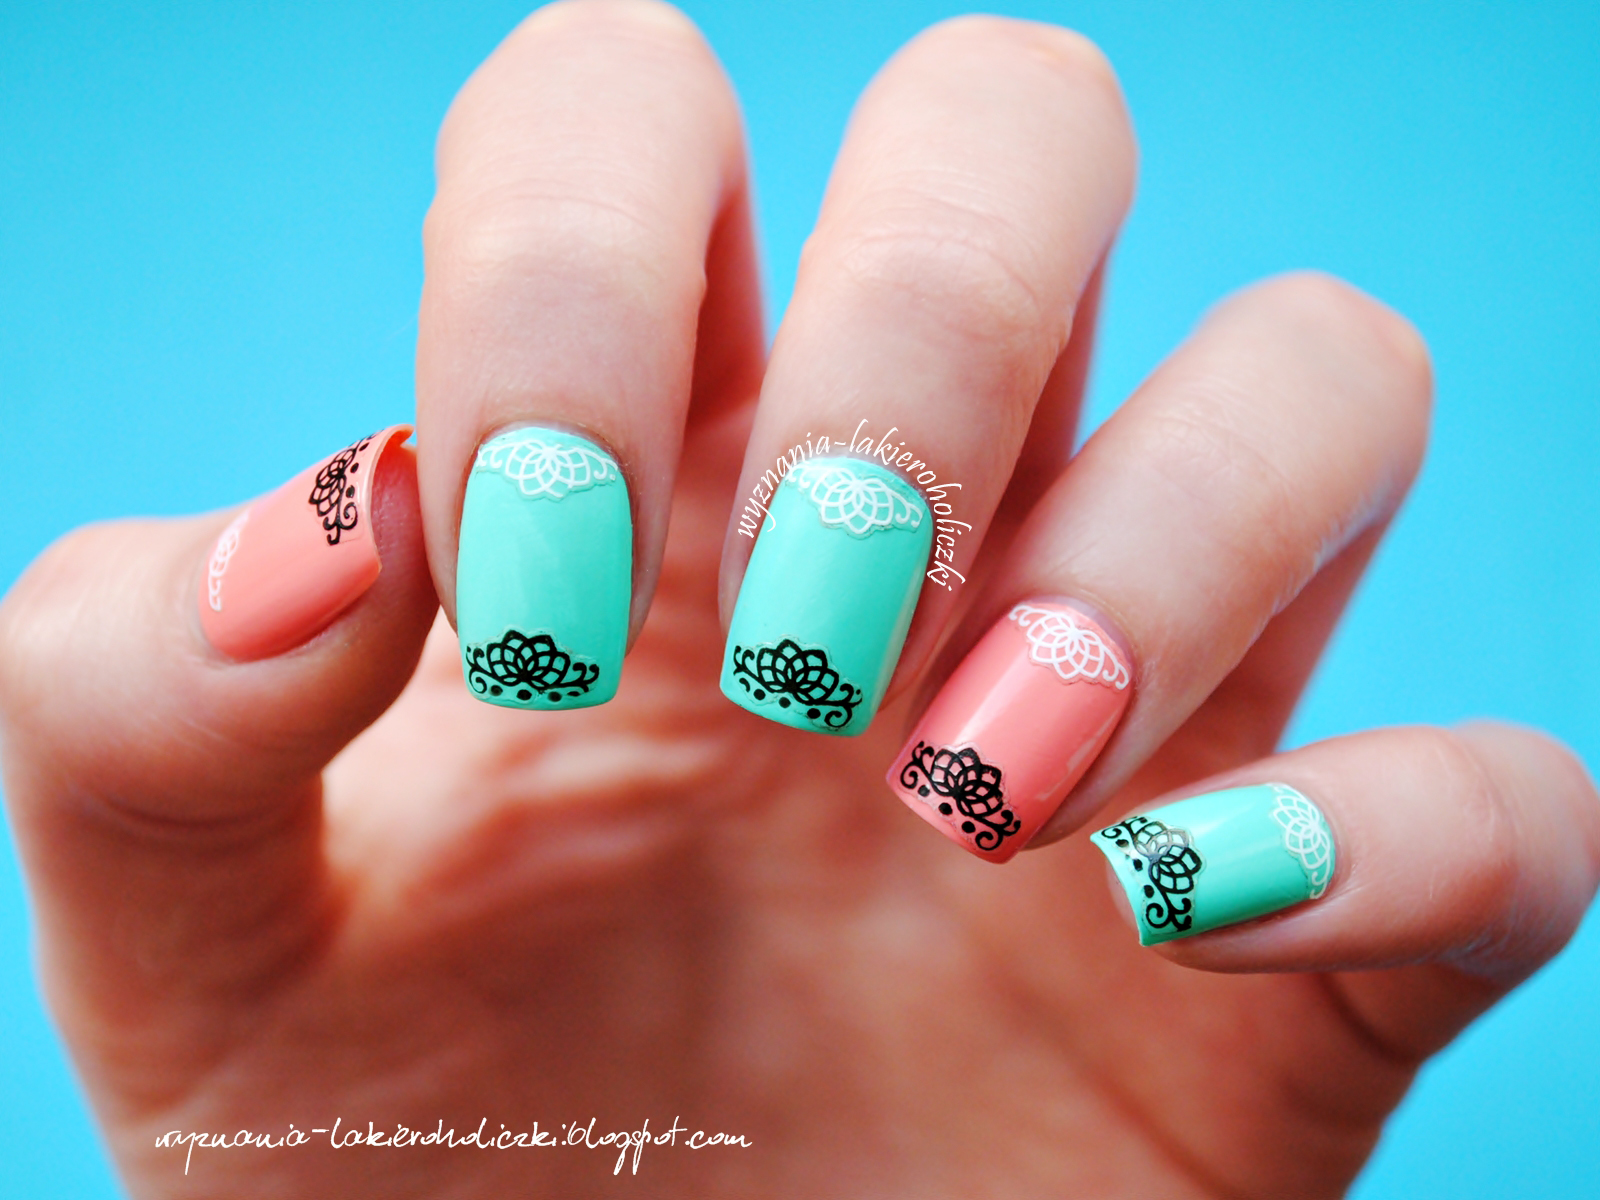 1. Lace Nail Art Designs on Pinterest - wide 4